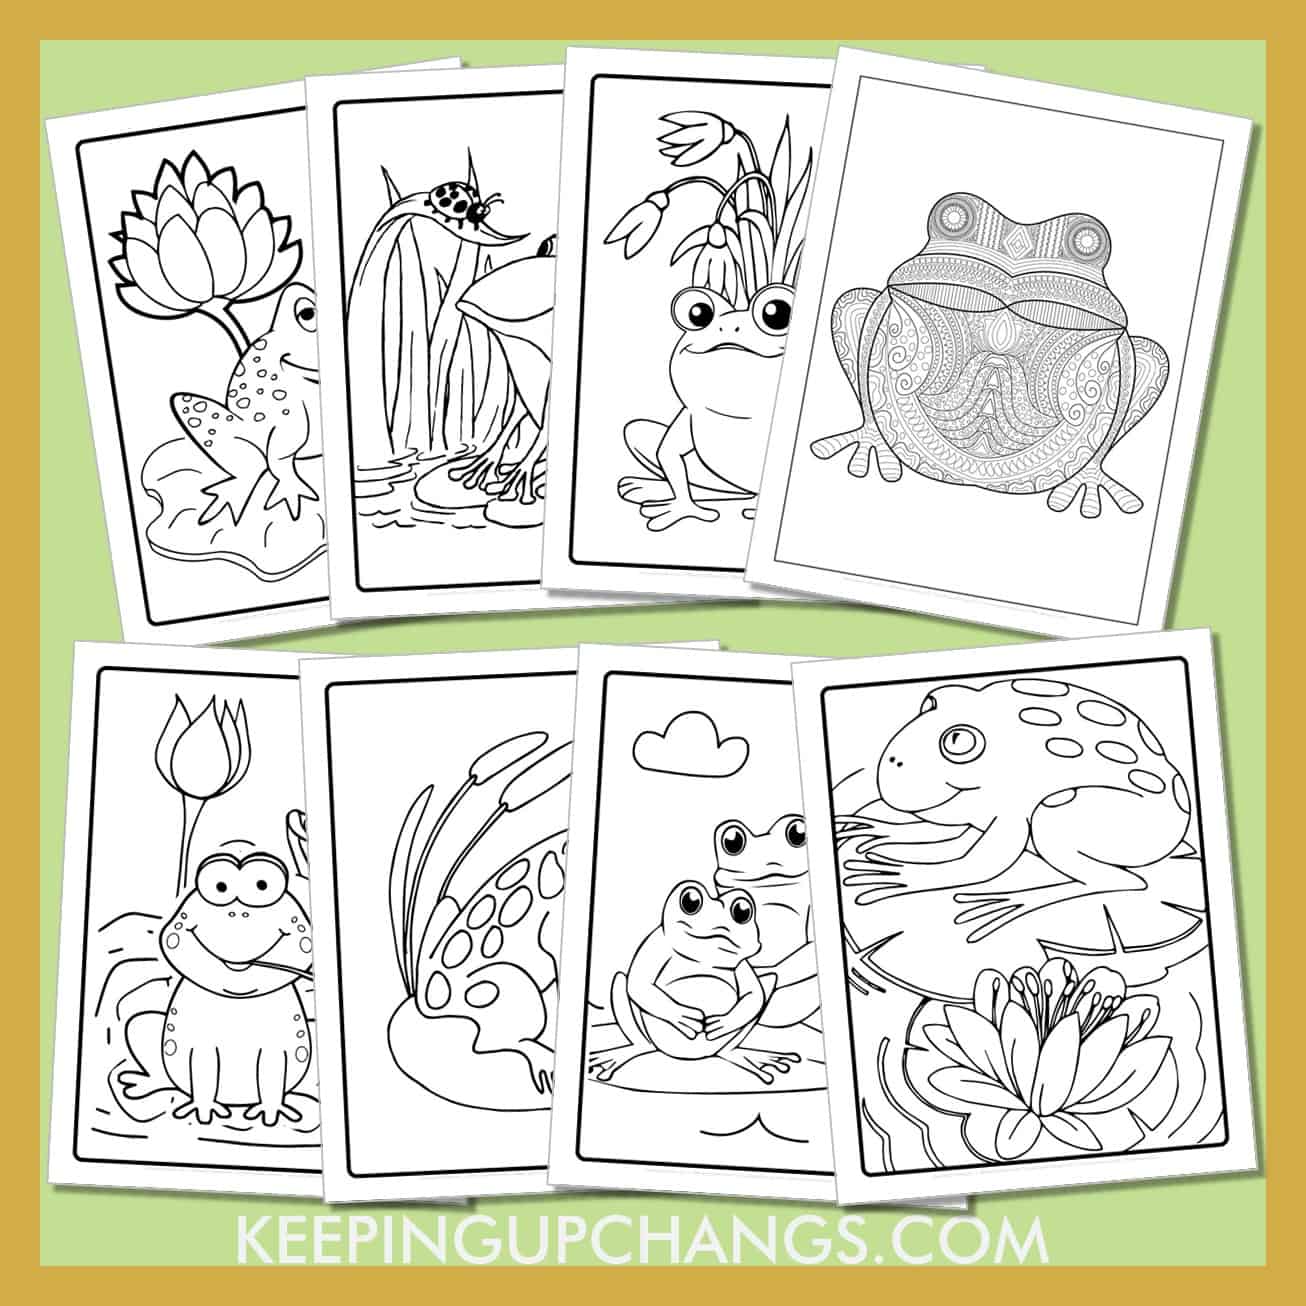 free frog pictures to color for toddlers, kids, adults.